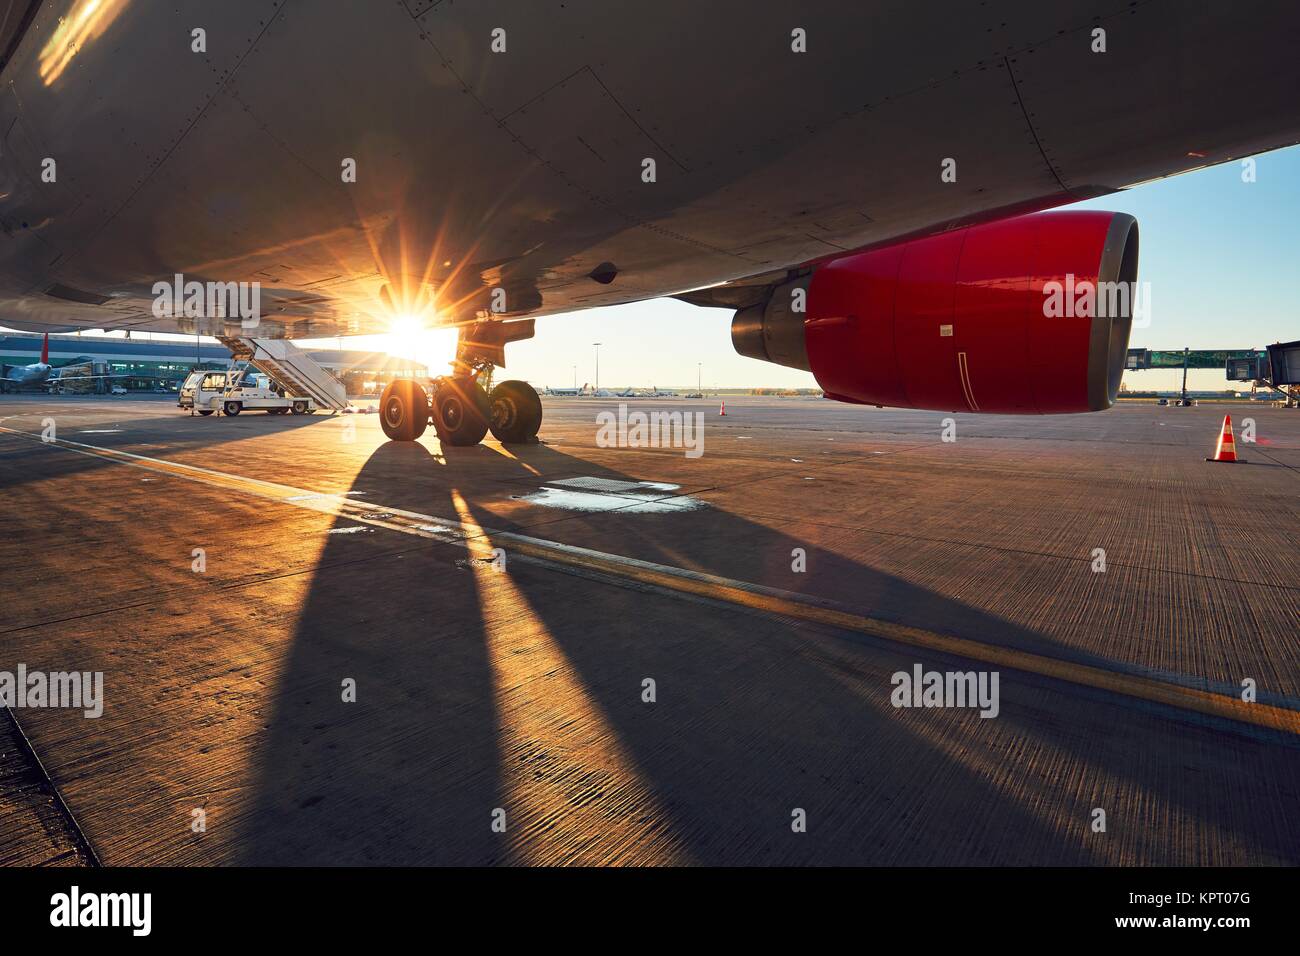 Landing gear of the airplane. Amazing sunset at the airport. Stock Photo